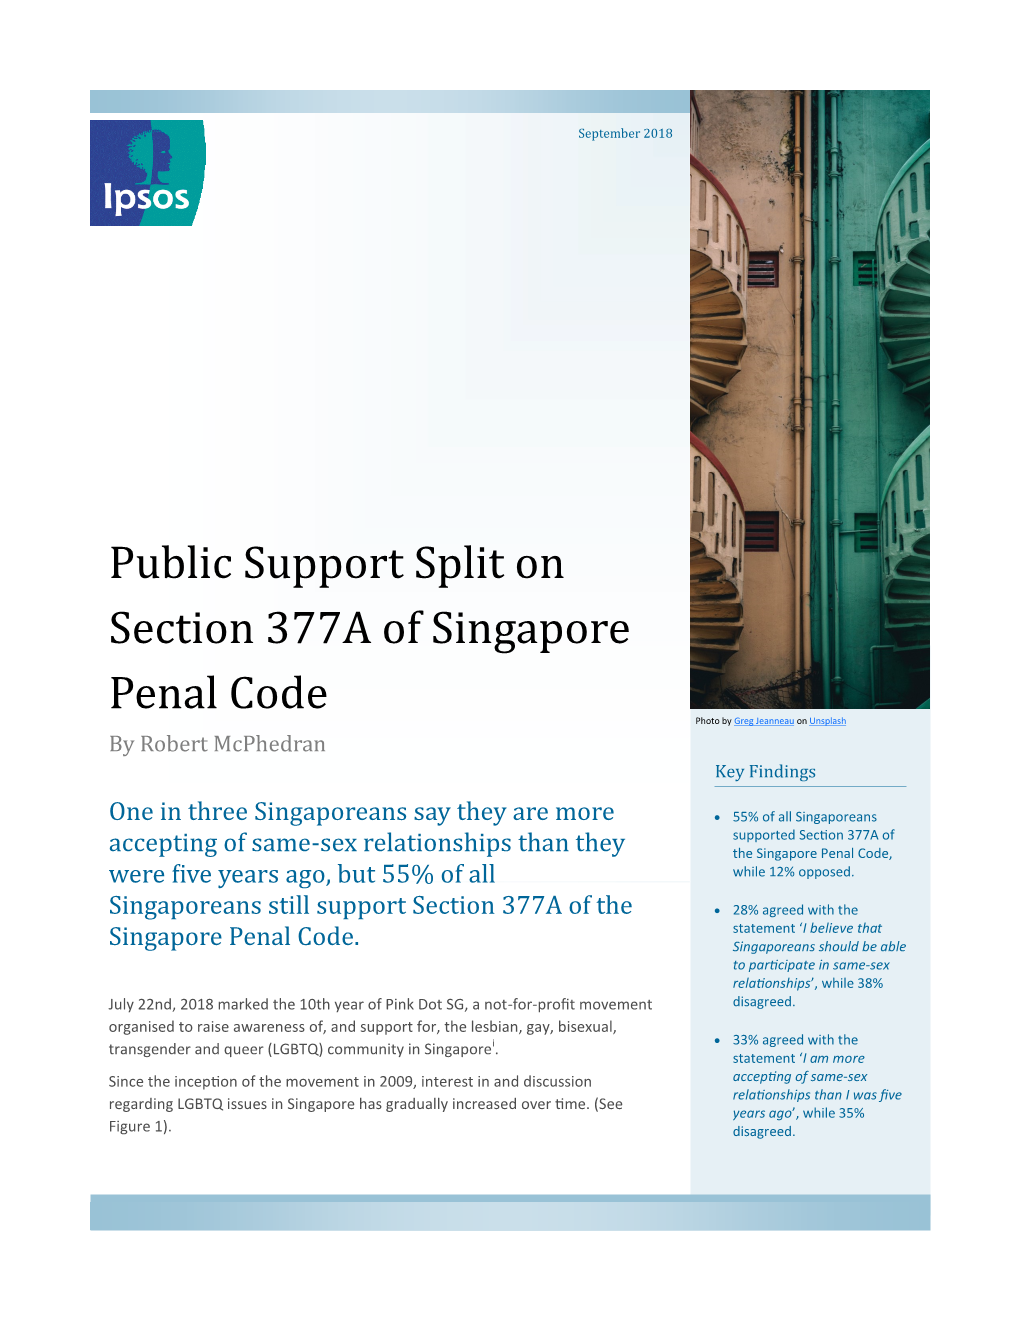 Public Support Split on Section 377A of Singapore Penal Code Photo by Greg Jeanneau on Unsplash by Robert Mcphedran Key Findings